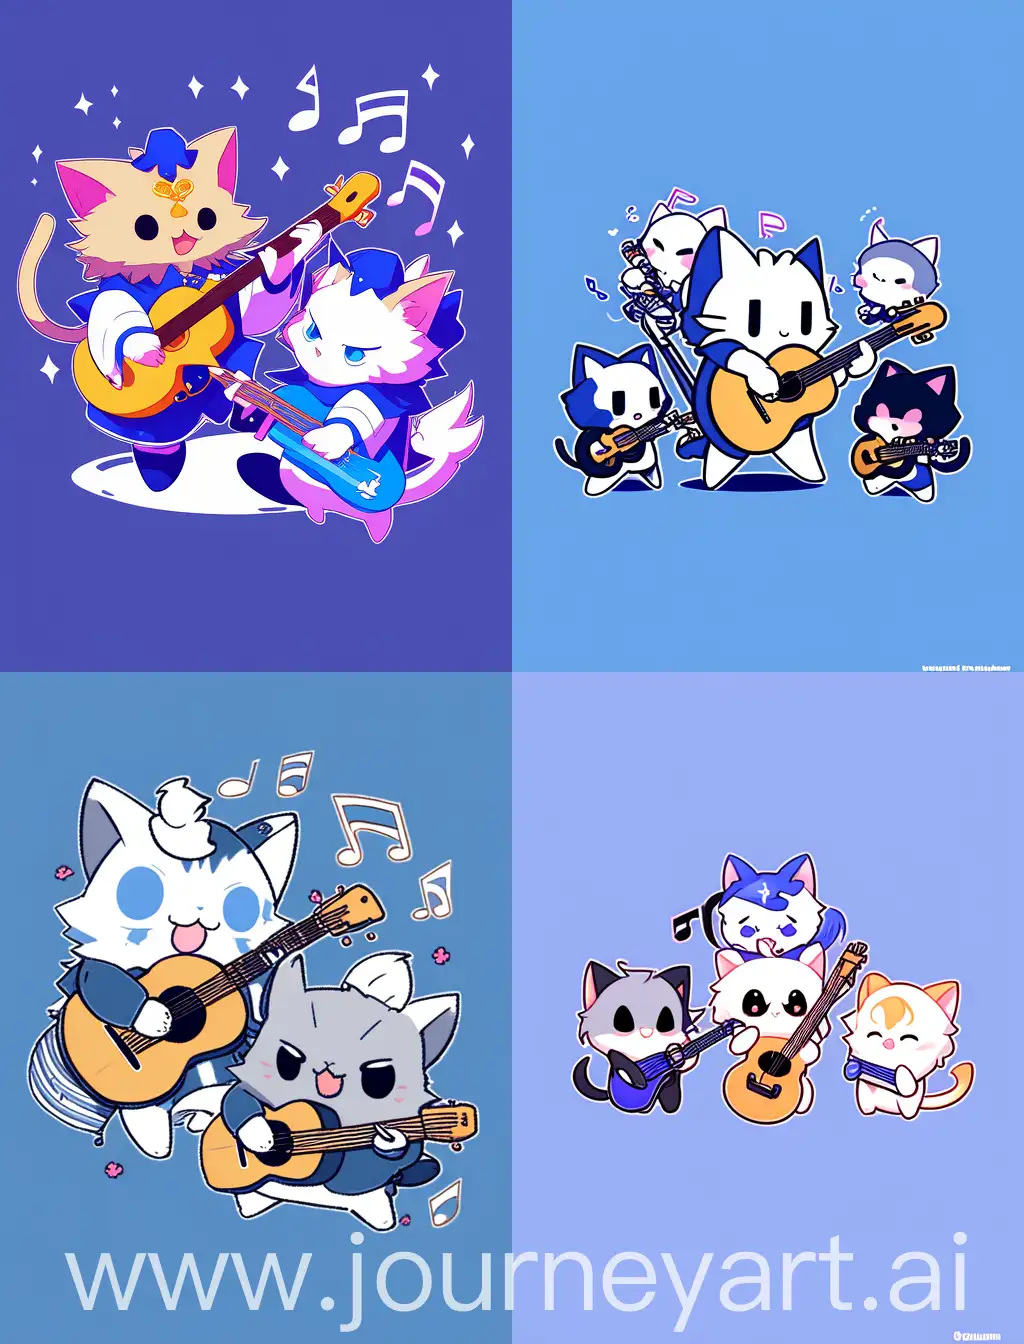 chibi cats playing guitar, with blue solid background, strong lines